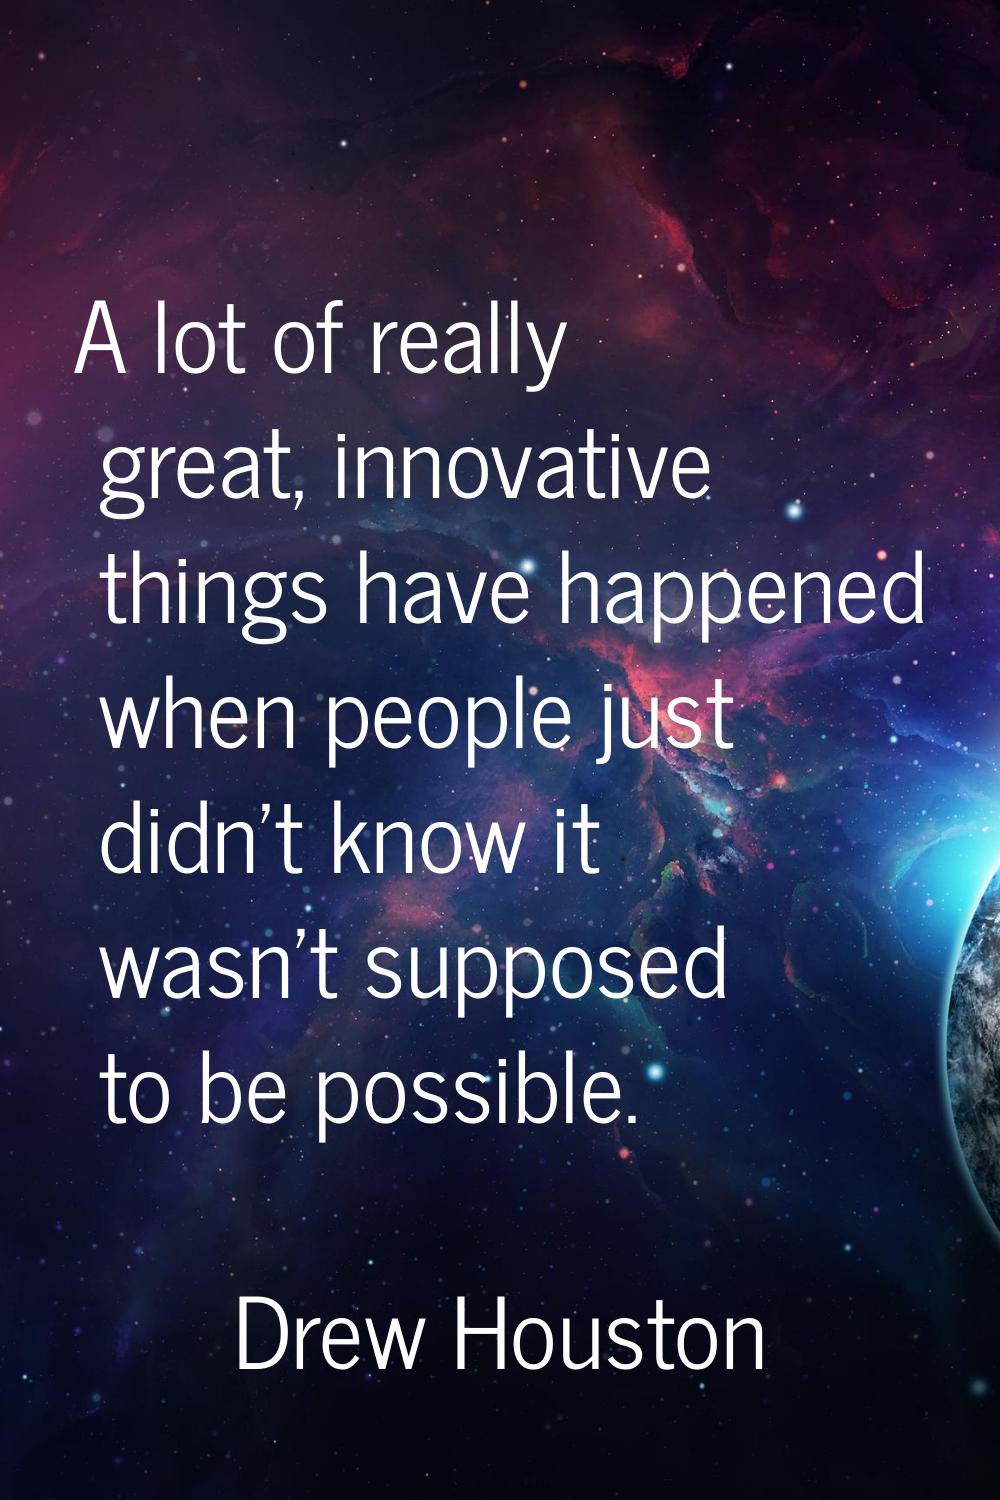 A lot of really great, innovative things have happened when people just didn't know it wasn't suppo